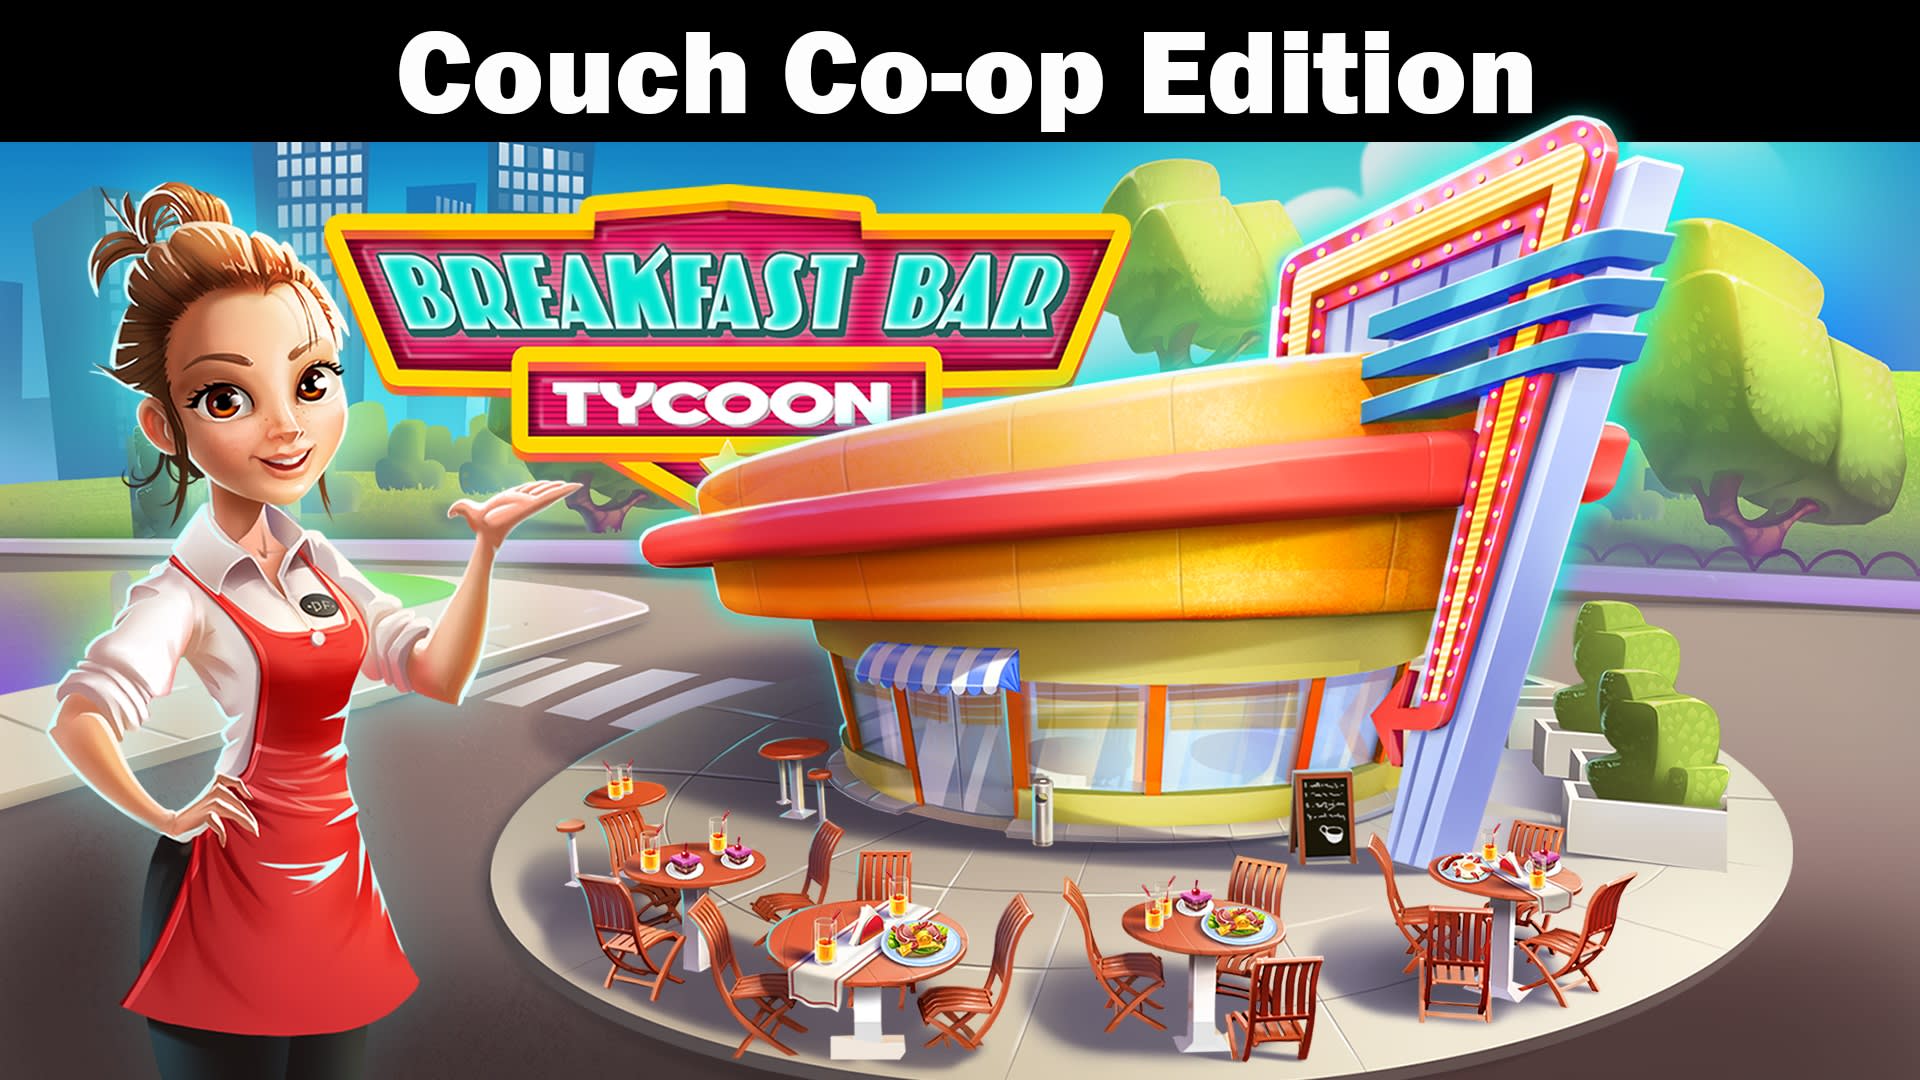 Breakfast Bar Tycoon Couch Co-op Edition